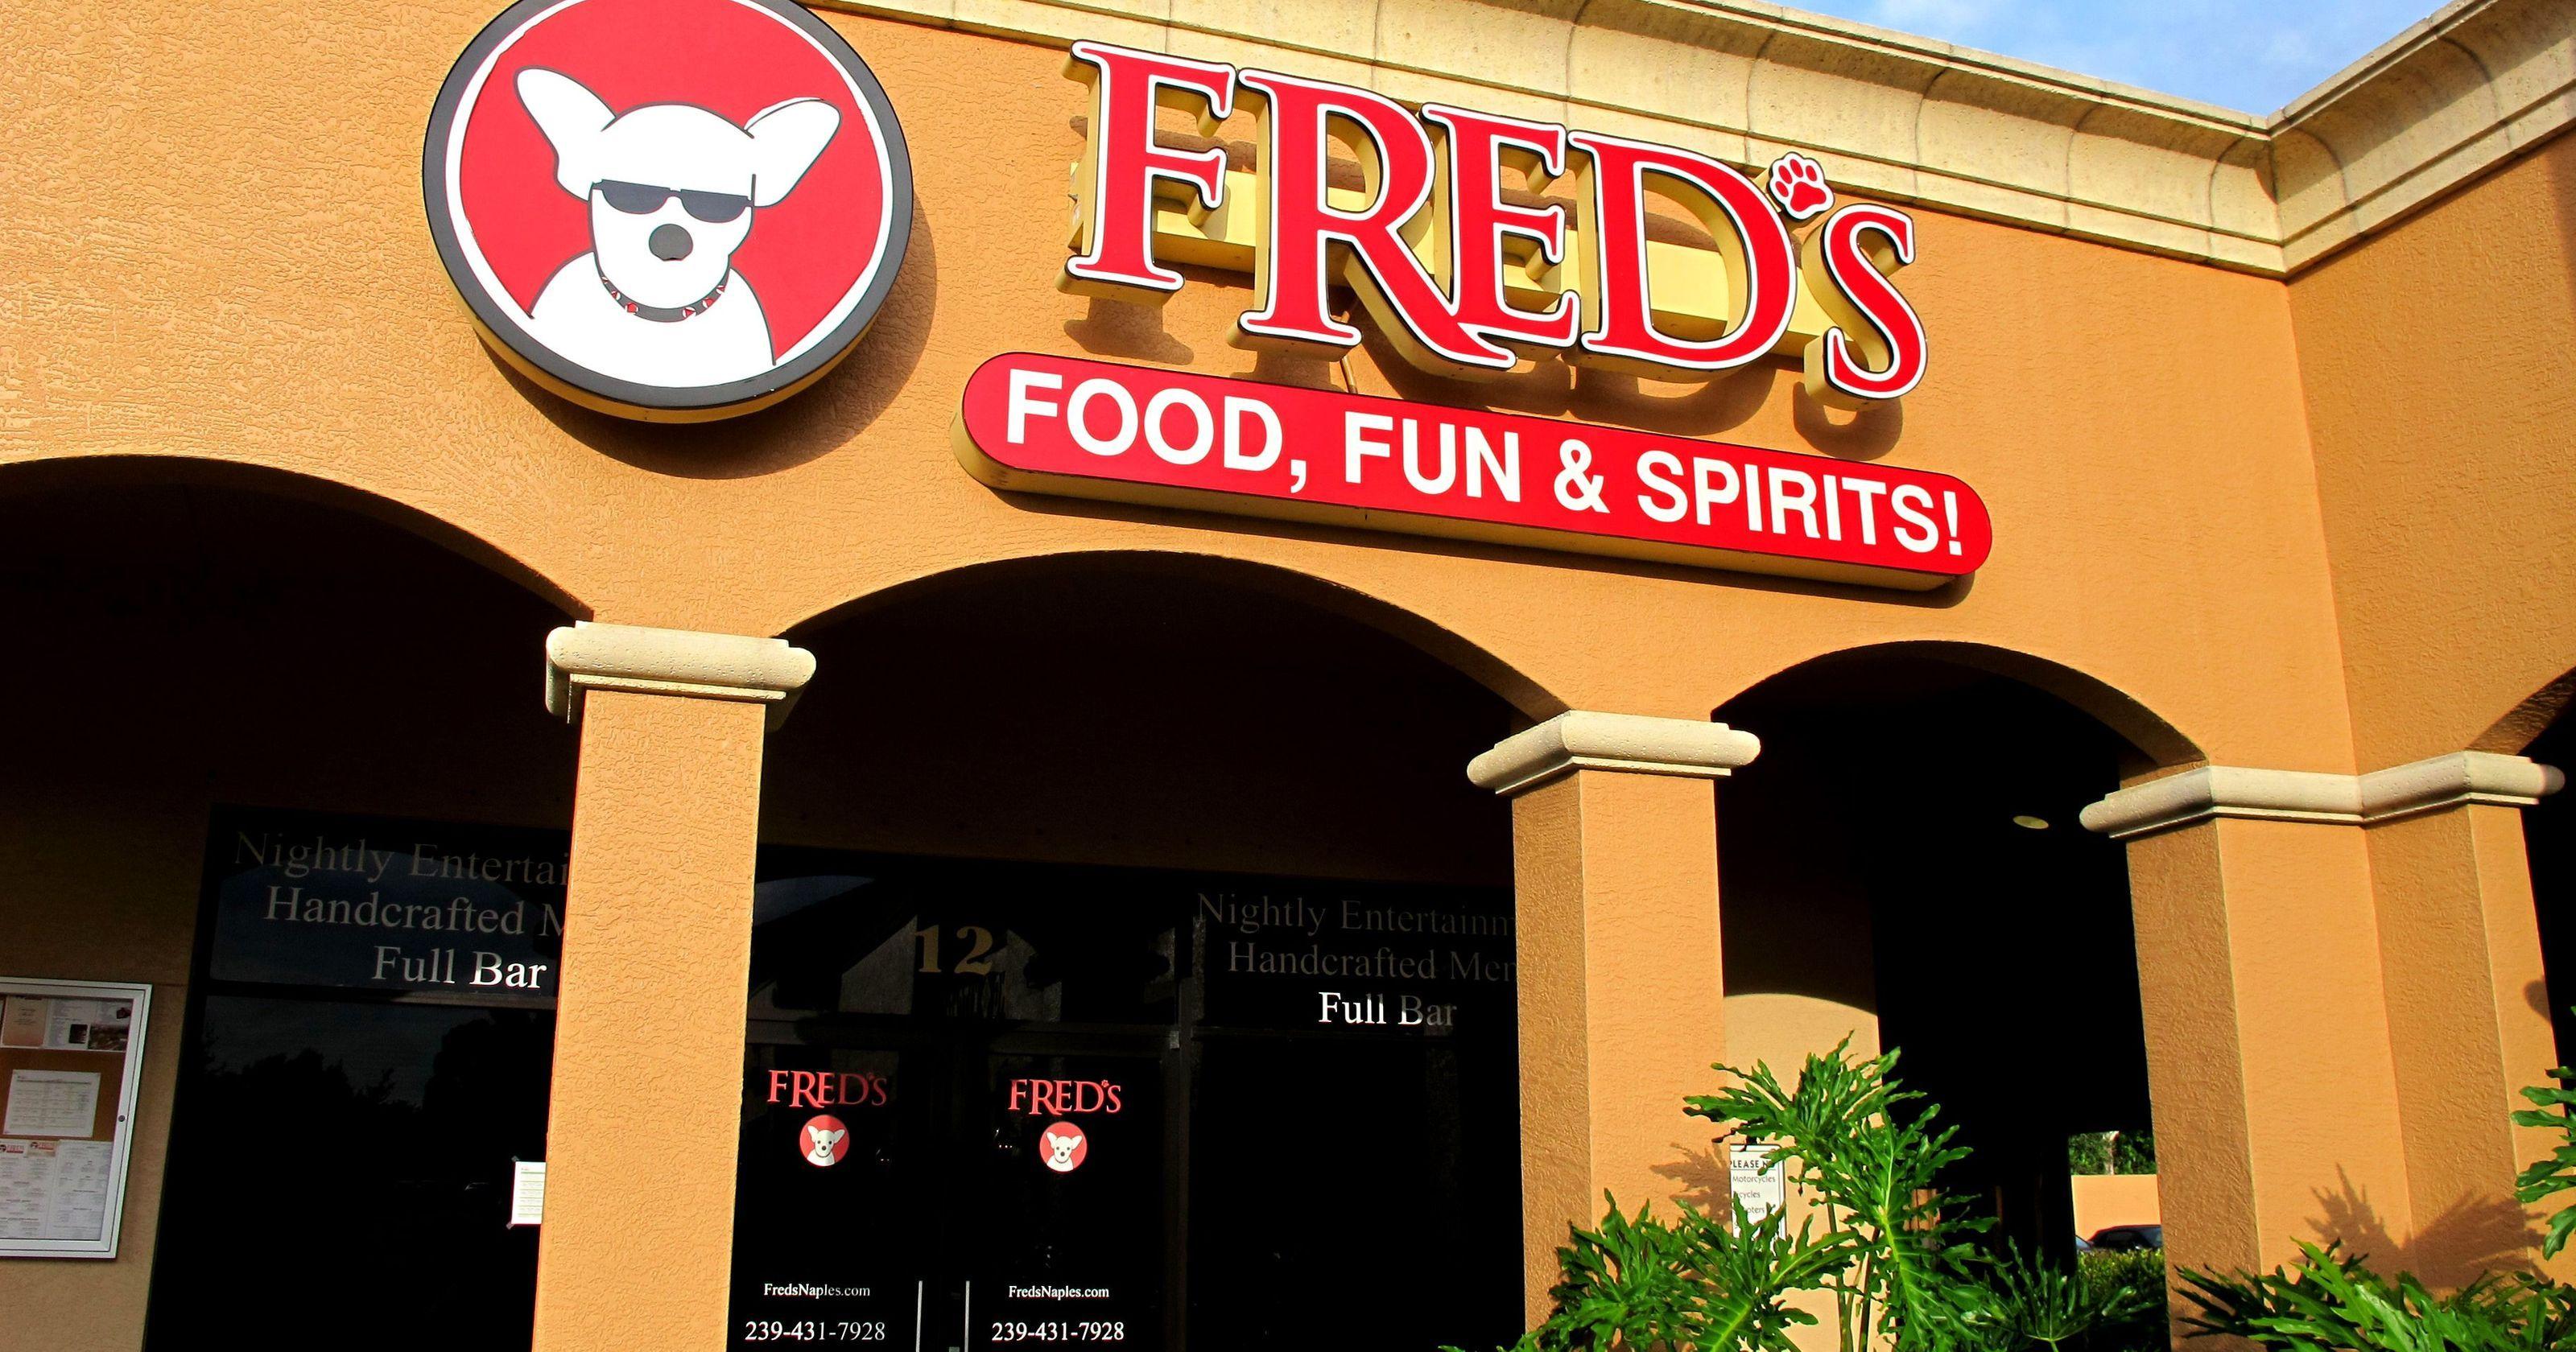 Freds Food Logo - In the Know: Fred's Food, Fun & Spirits closing in North Naples